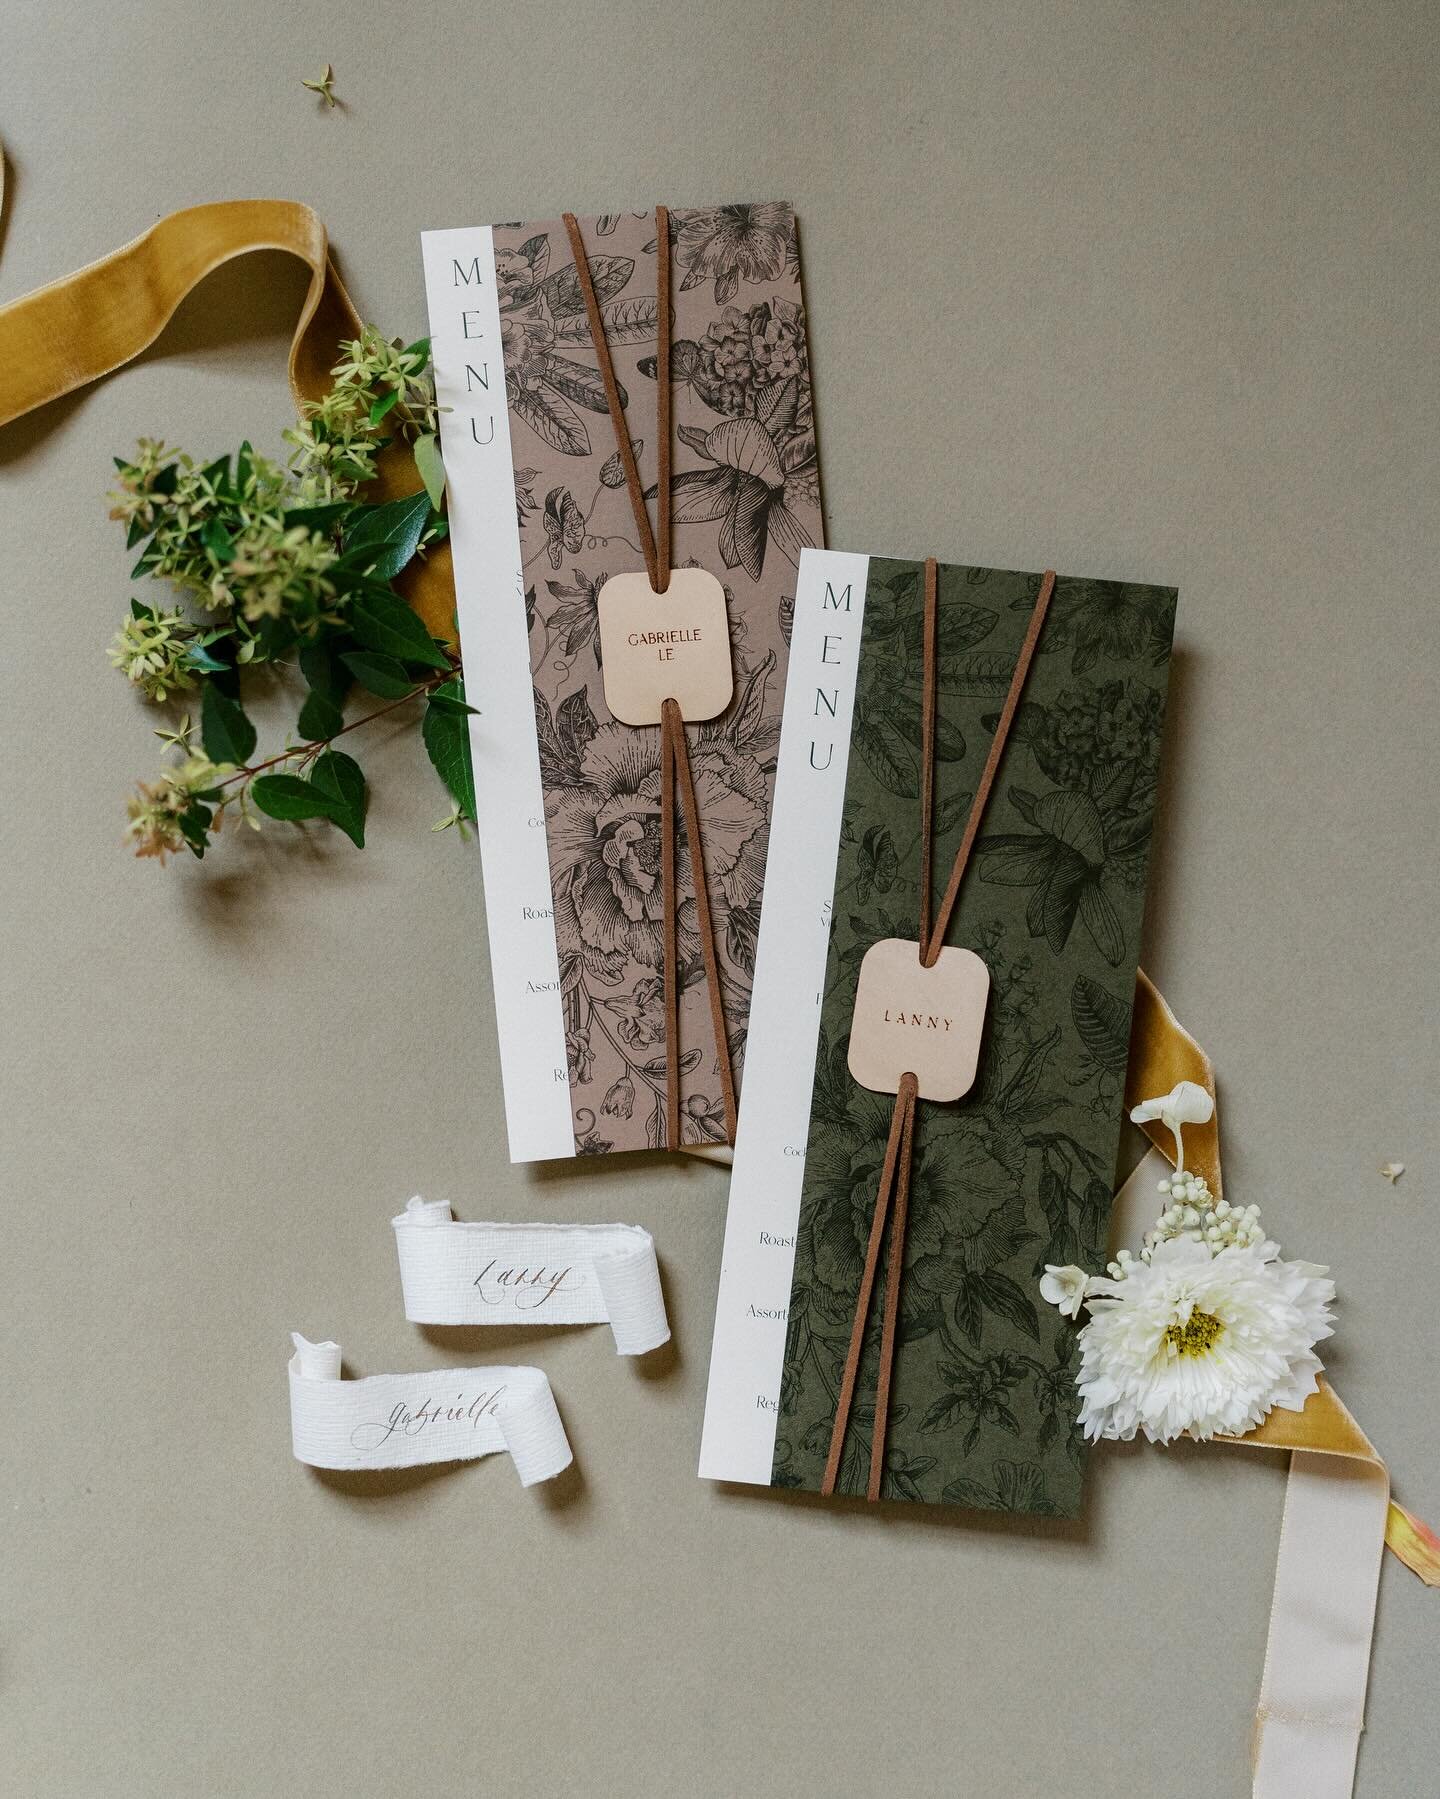 You would never know these colors were for meal indicators. We&rsquo;re all about a subtle meal indicator ✨ menu covers for meals and leather tags for place cards @caitie.hanrahan @mtwashingtonmilldyehouse @sarandonsmithphoto @katecampbellfloral @hon